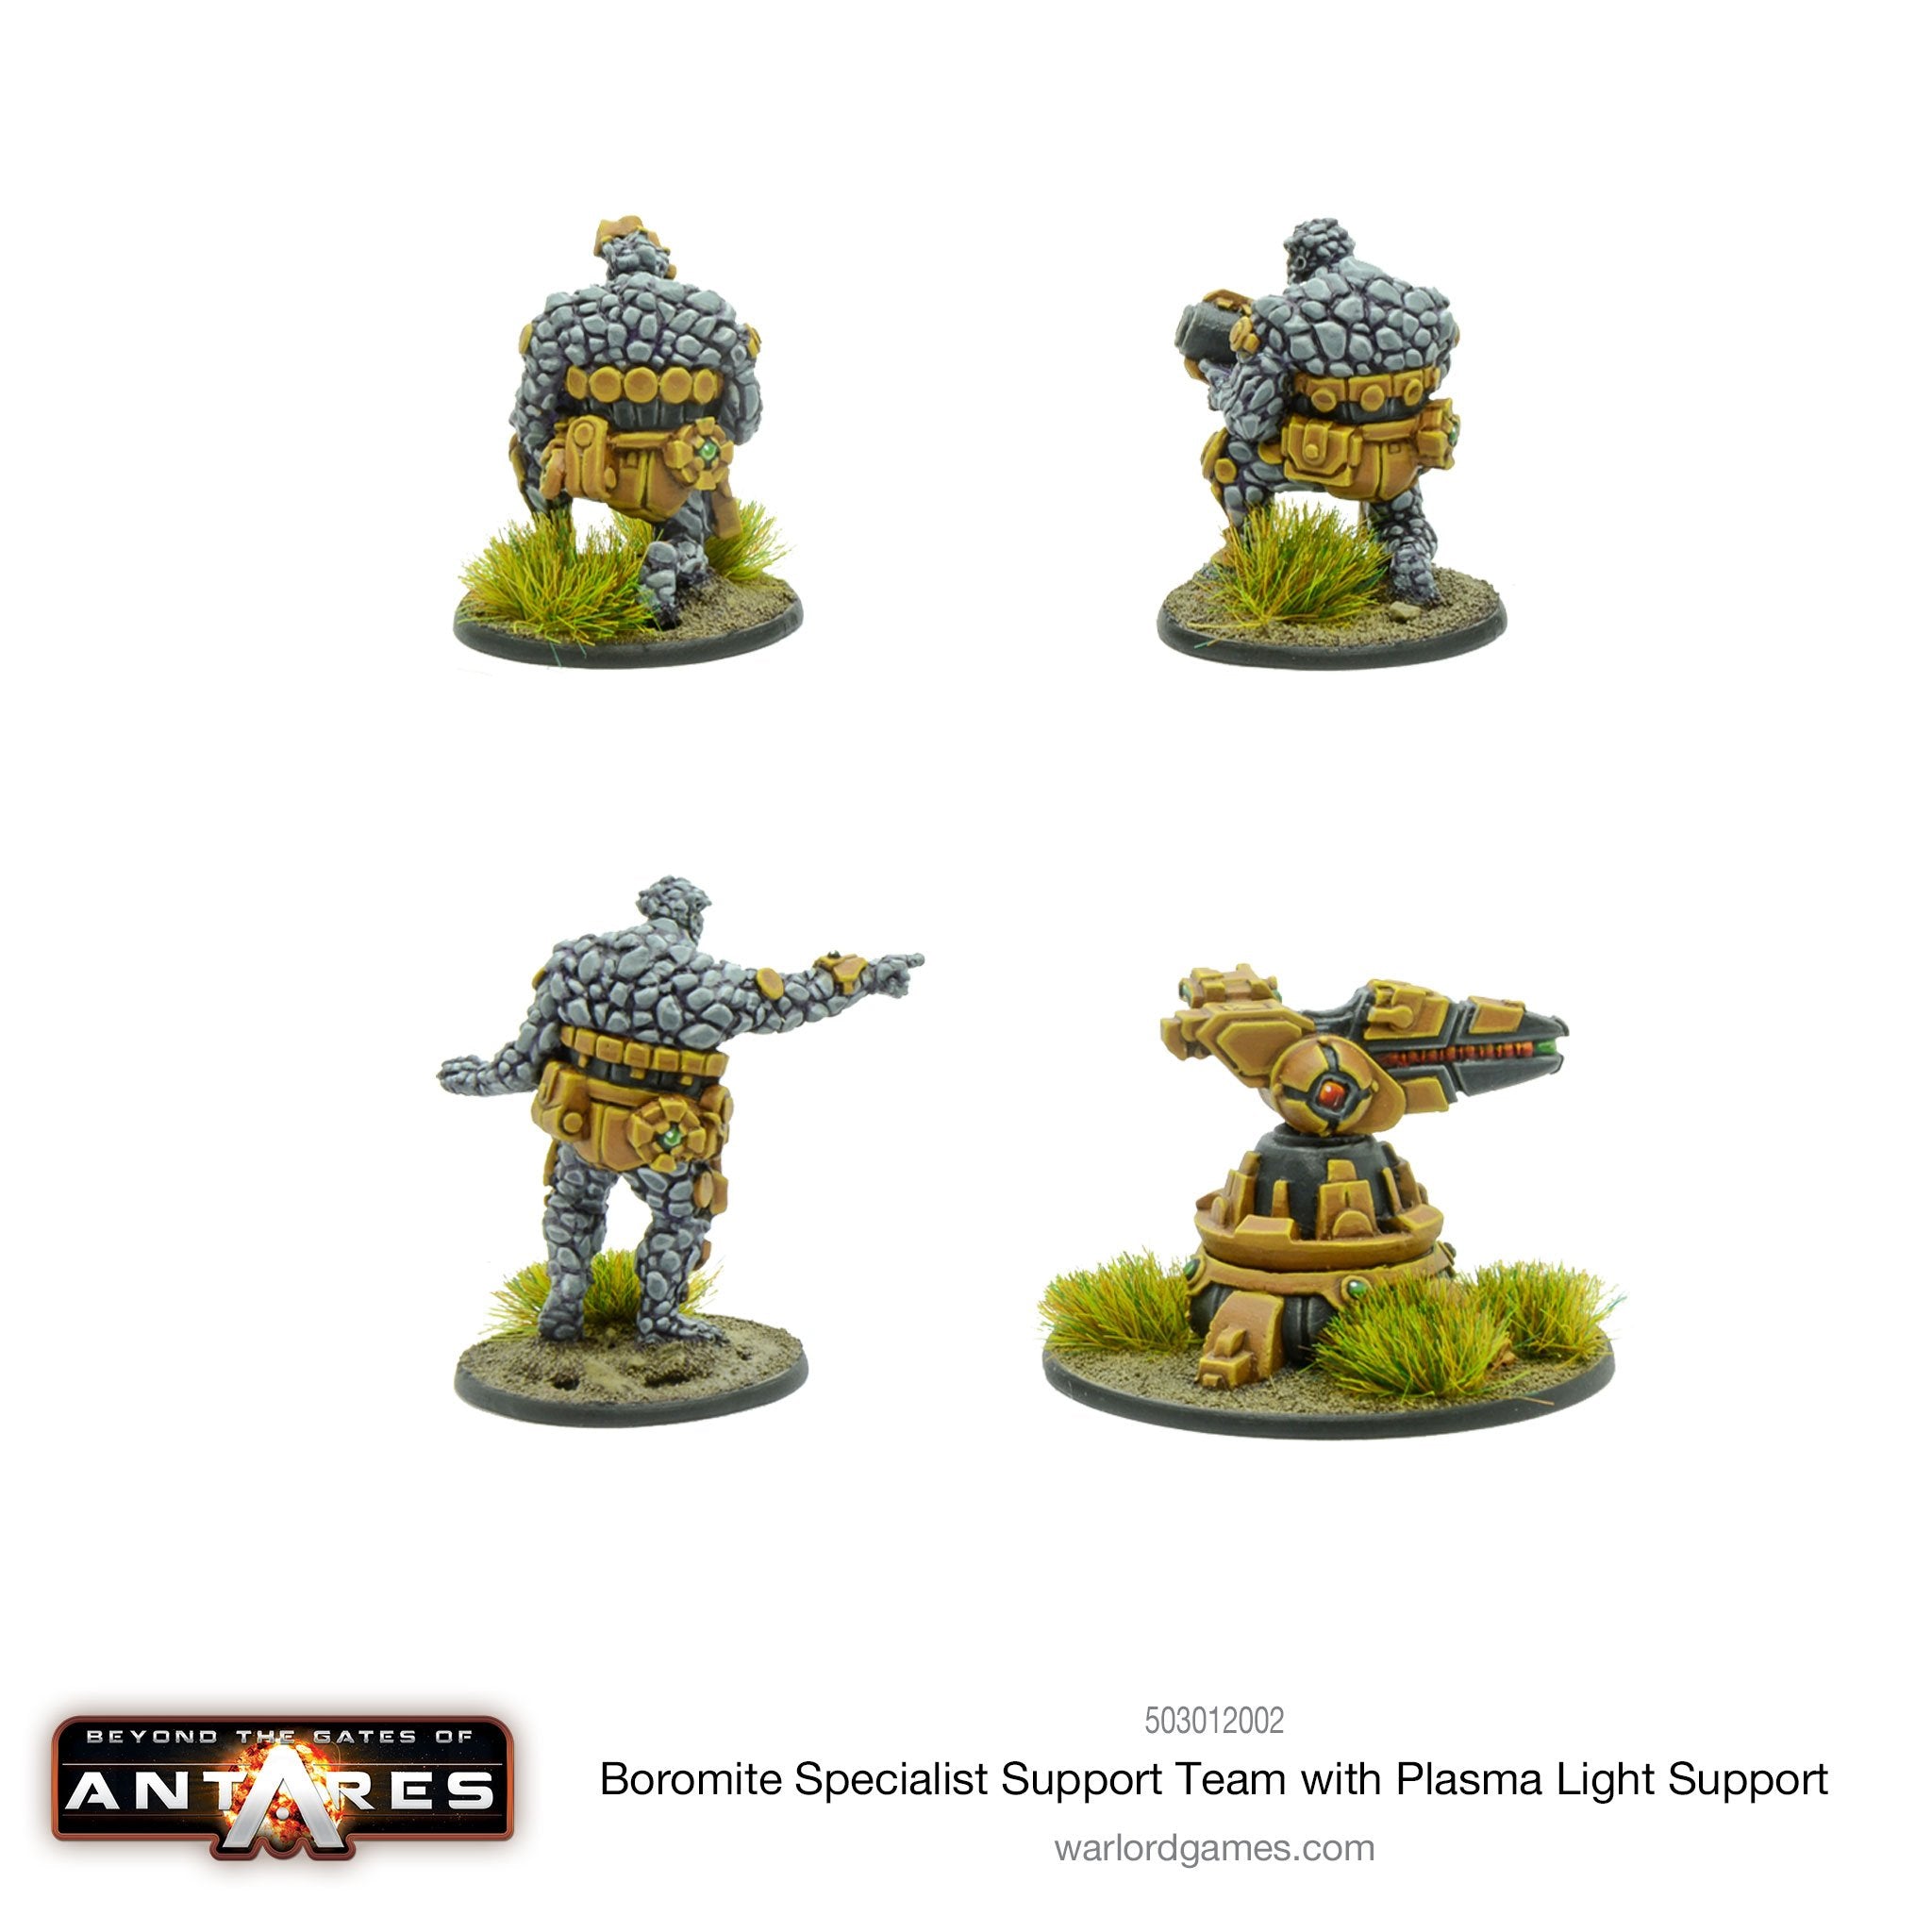 Boromite Specialist Support Team with Plasma Light Support